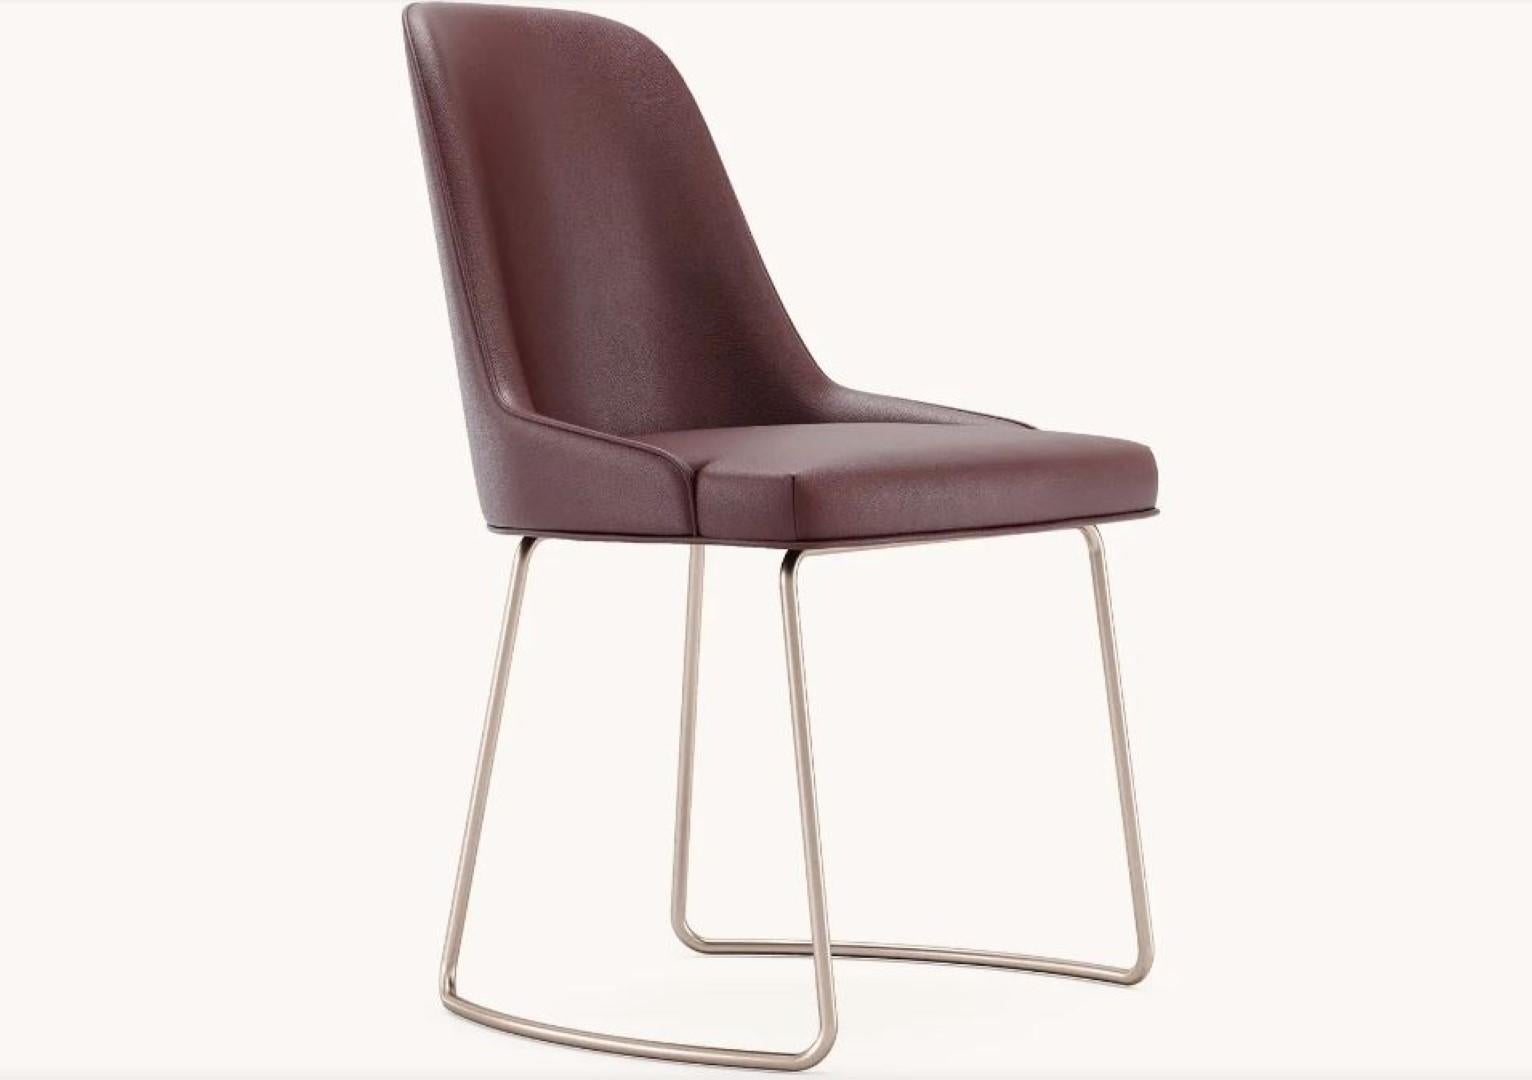 Anna chair with metal baseboard by Domkapa
Materials: Rose Gold Brushed metal, Natural Leather.
Dimensions: W 56 x D 57 x H 86 cm. 
Also available in different materials. 

This timeless chair design is the result of a mature awareness process